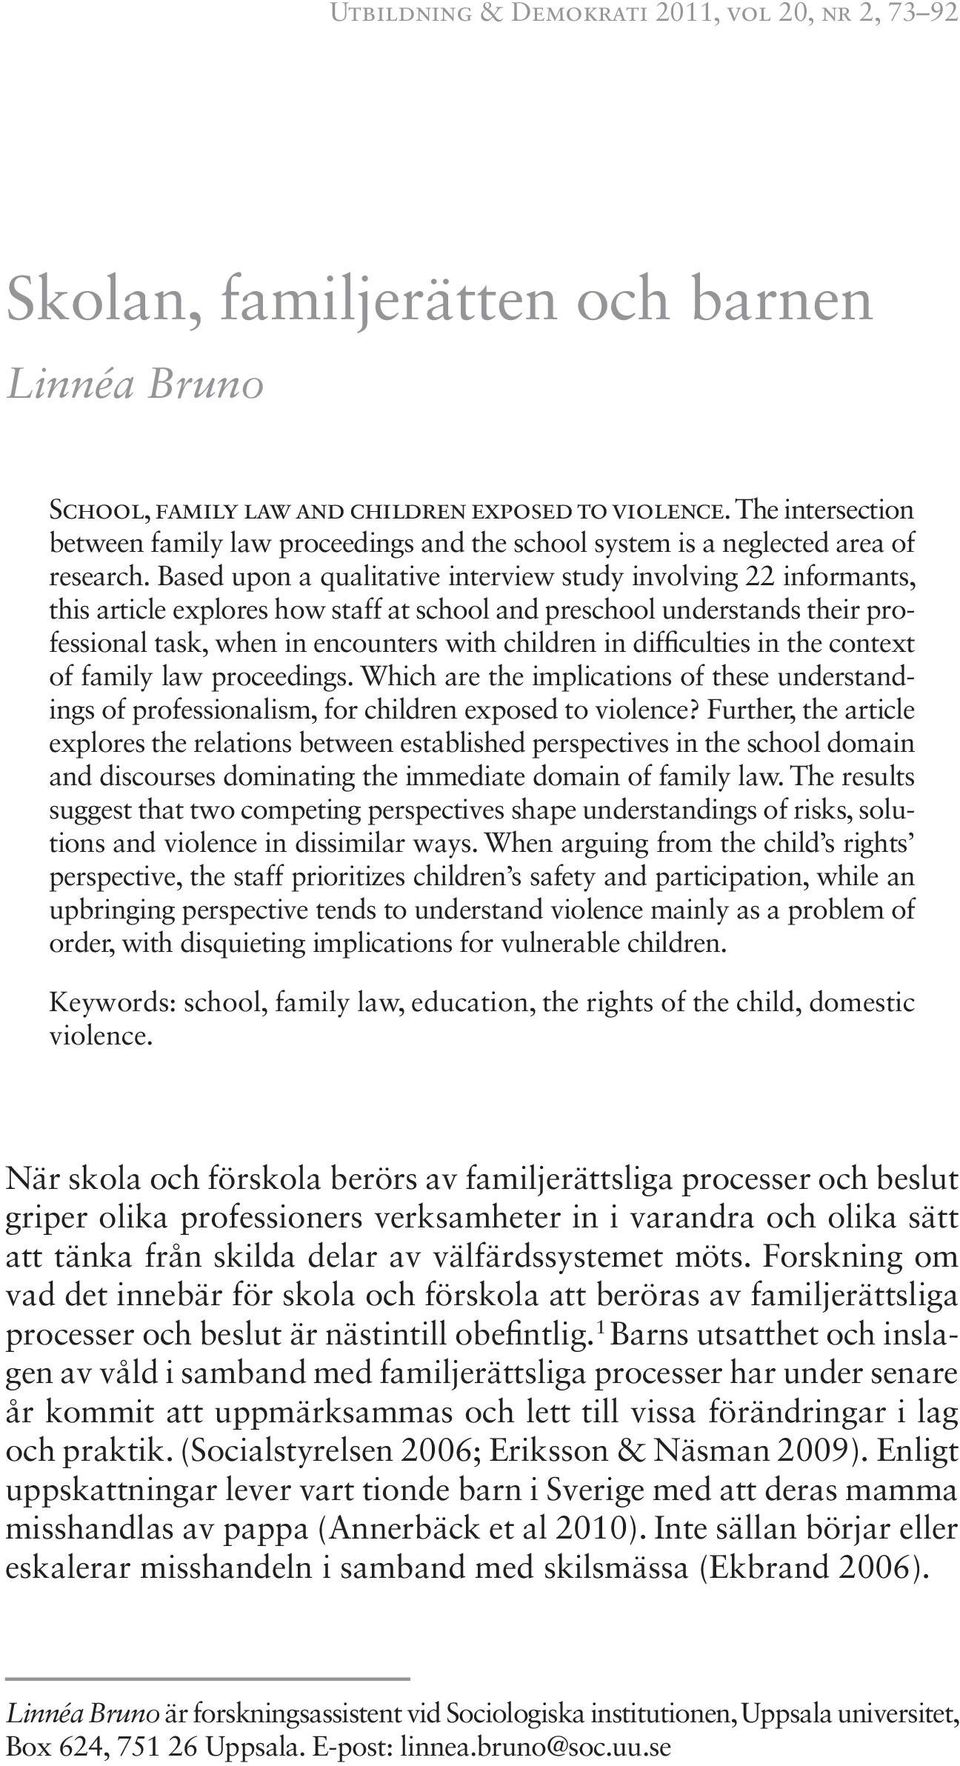 Based upon a qualitative interview study involving 22 informants, this article explores how staff at school and preschool understands their professional task, when in encounters with children in